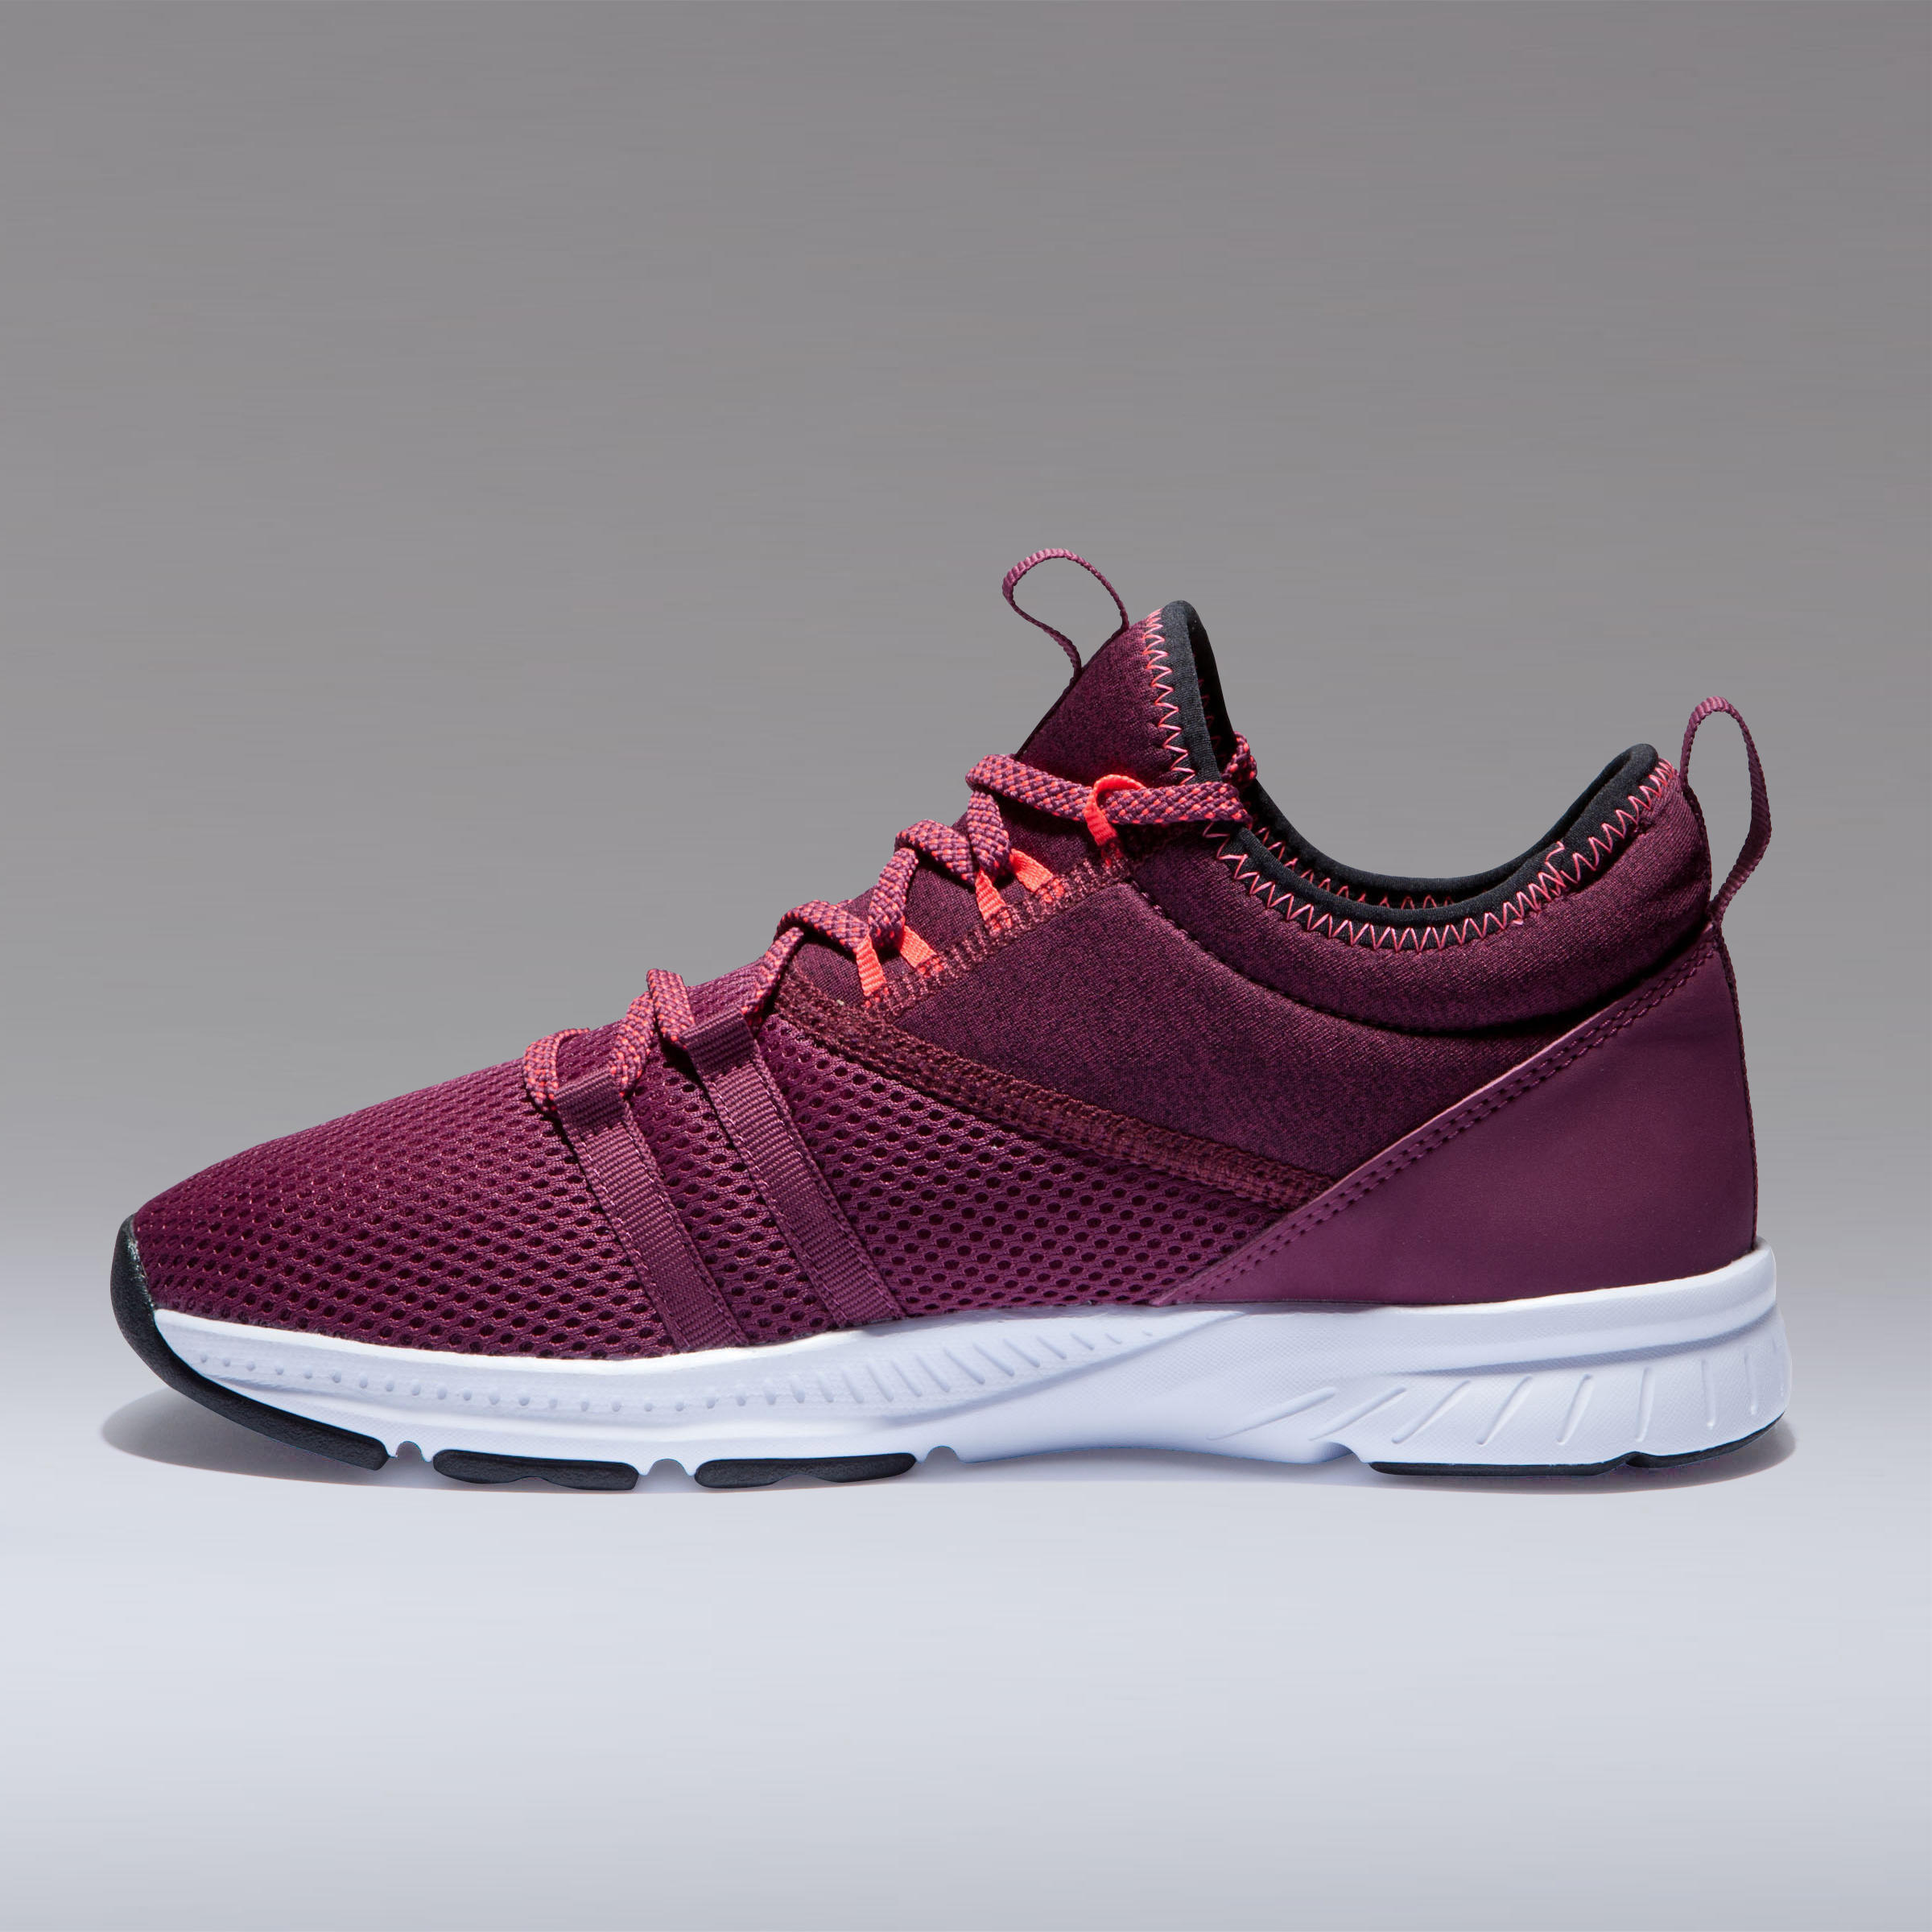 Women's Fitness Shoes 120 Mid - Burgundy 4/16